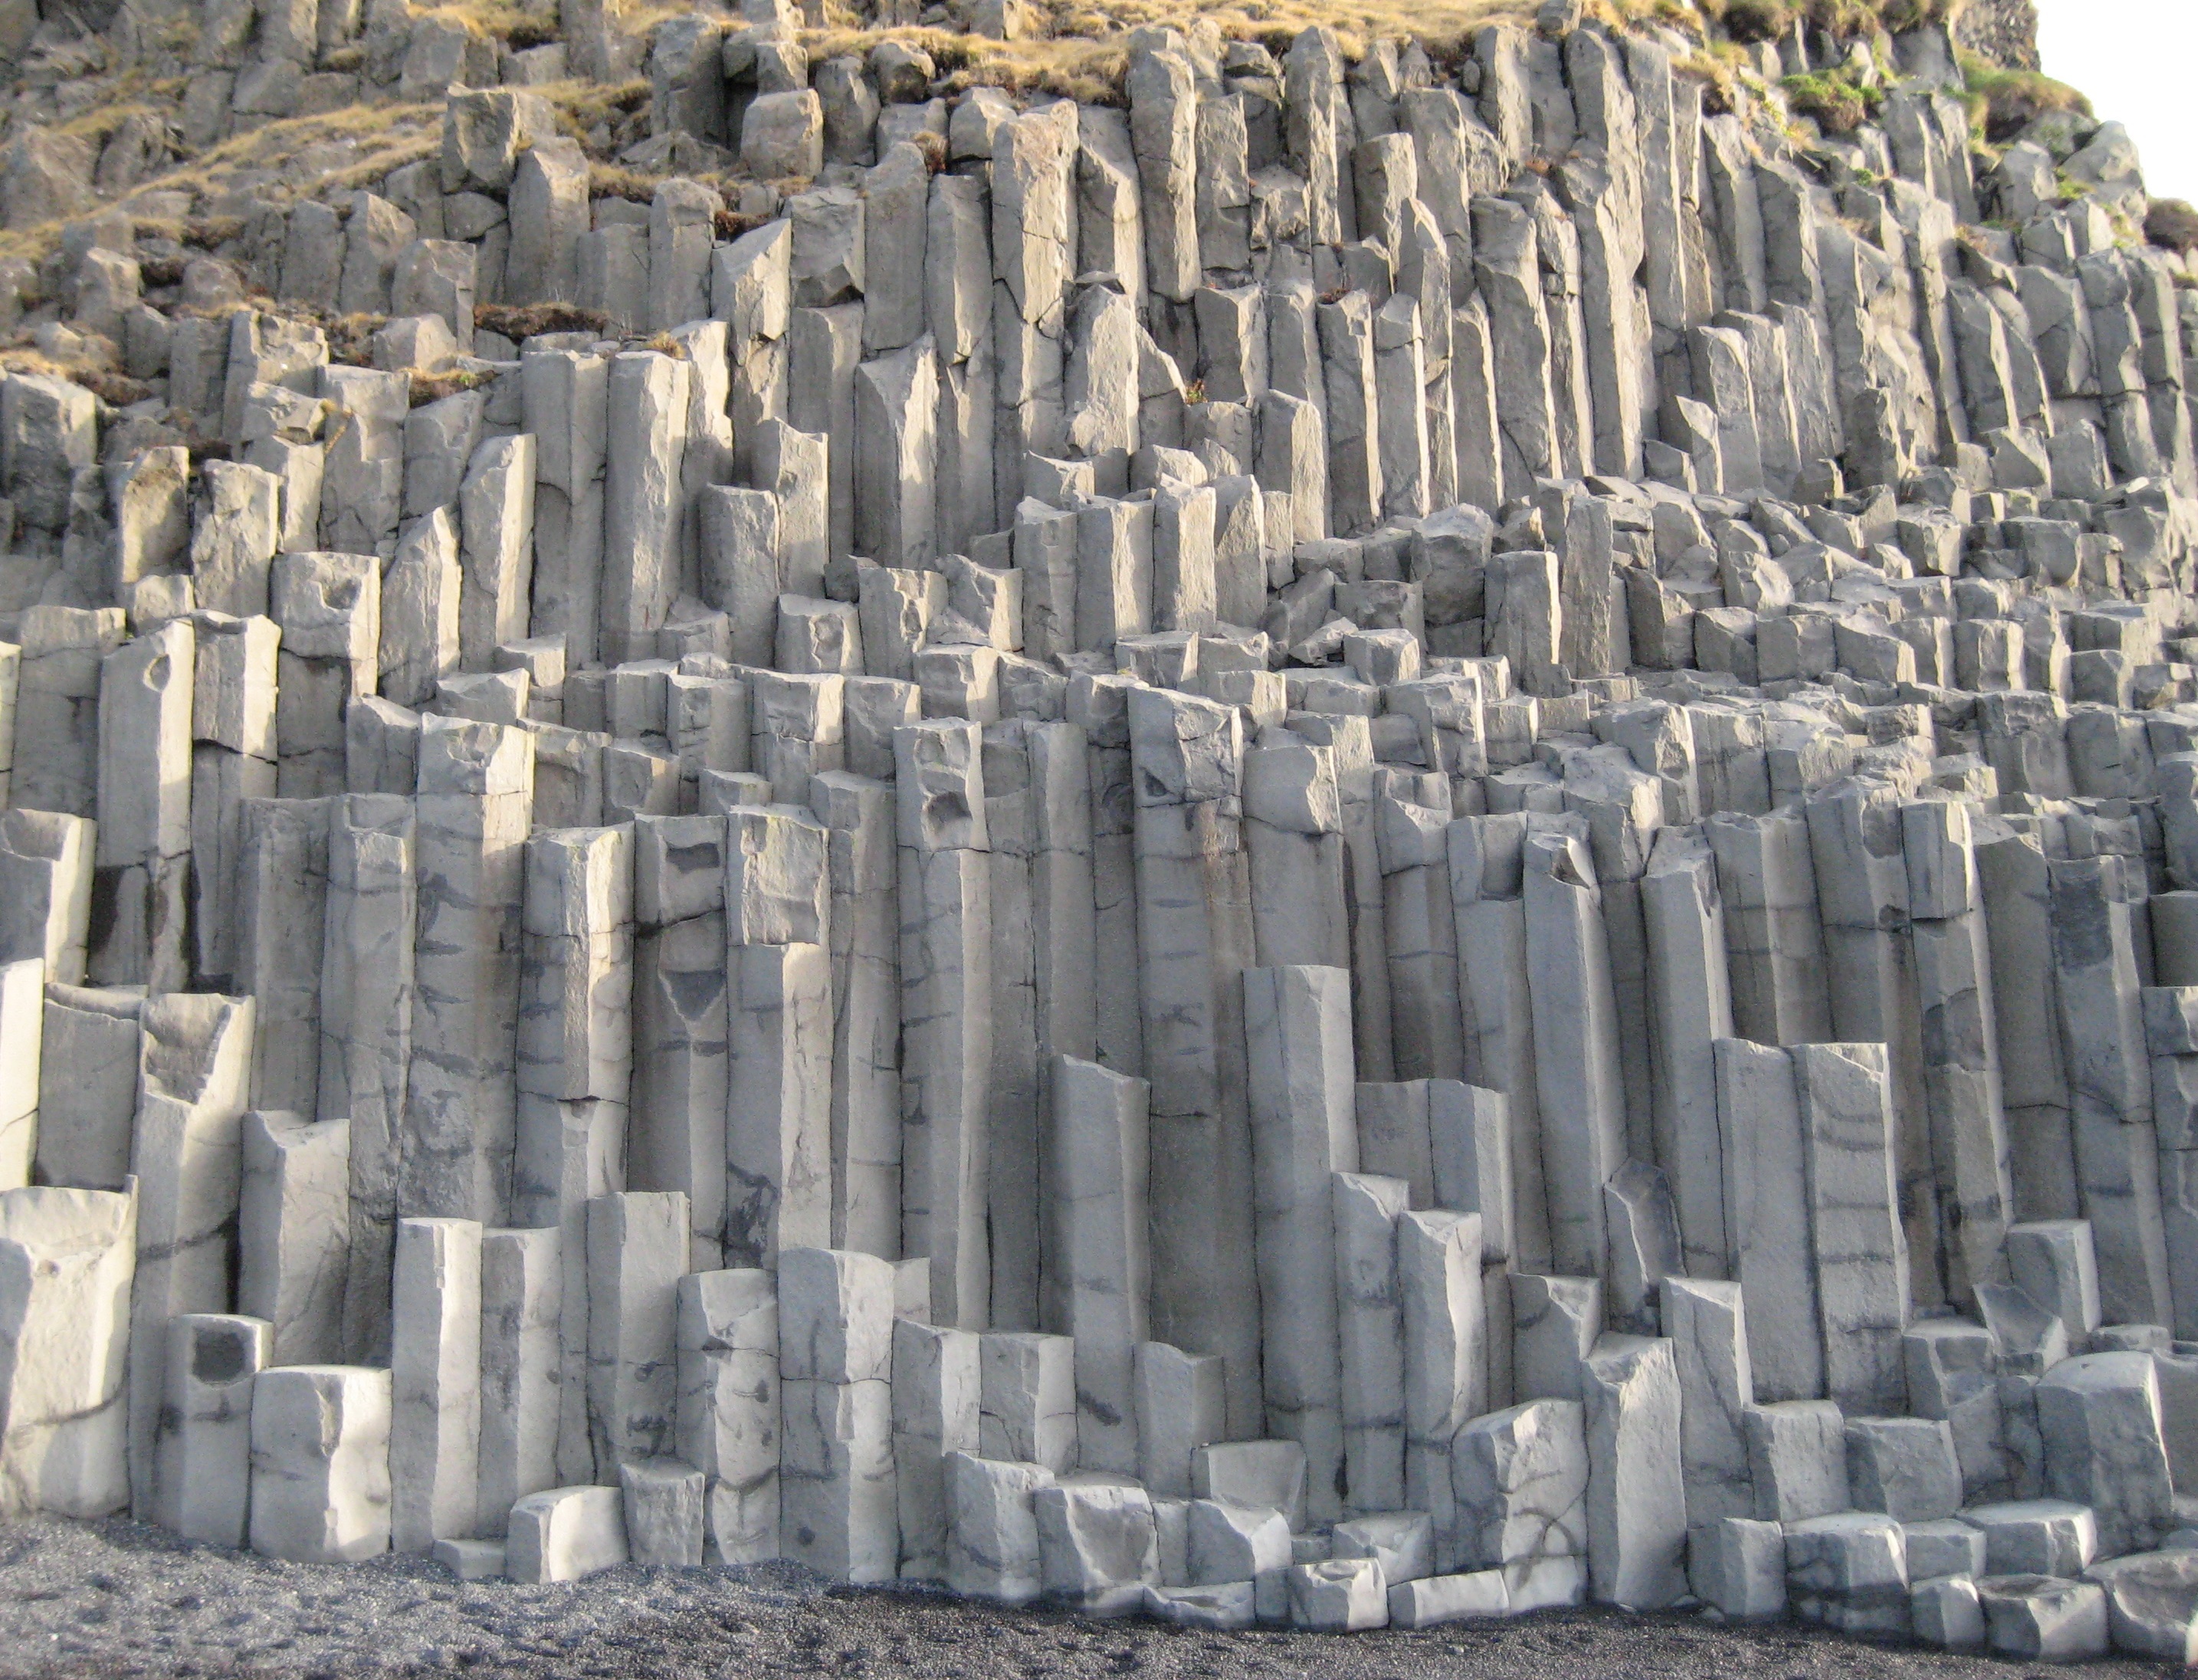 Hexagonal basalt columns can be found on Iceland's South Coast, particularly around the cliffs and arch of Dyrhólaey.